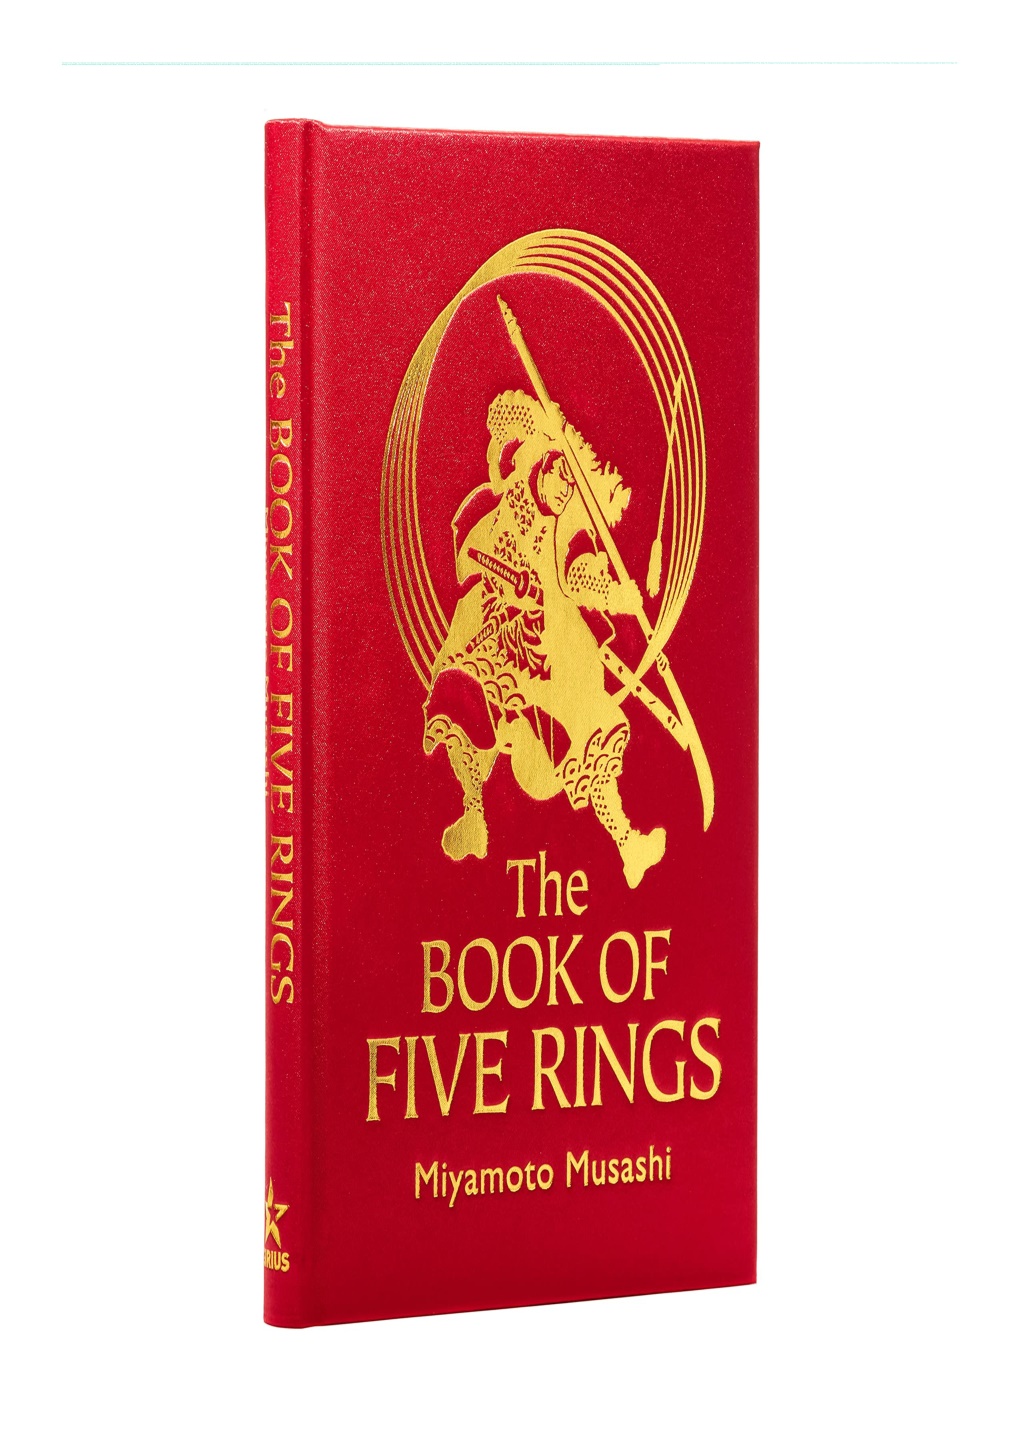 Just got the Book of Five Rings and Art of War off of amazon, but im  concerned that these aren't the full versions. When I look them up on  google, it says